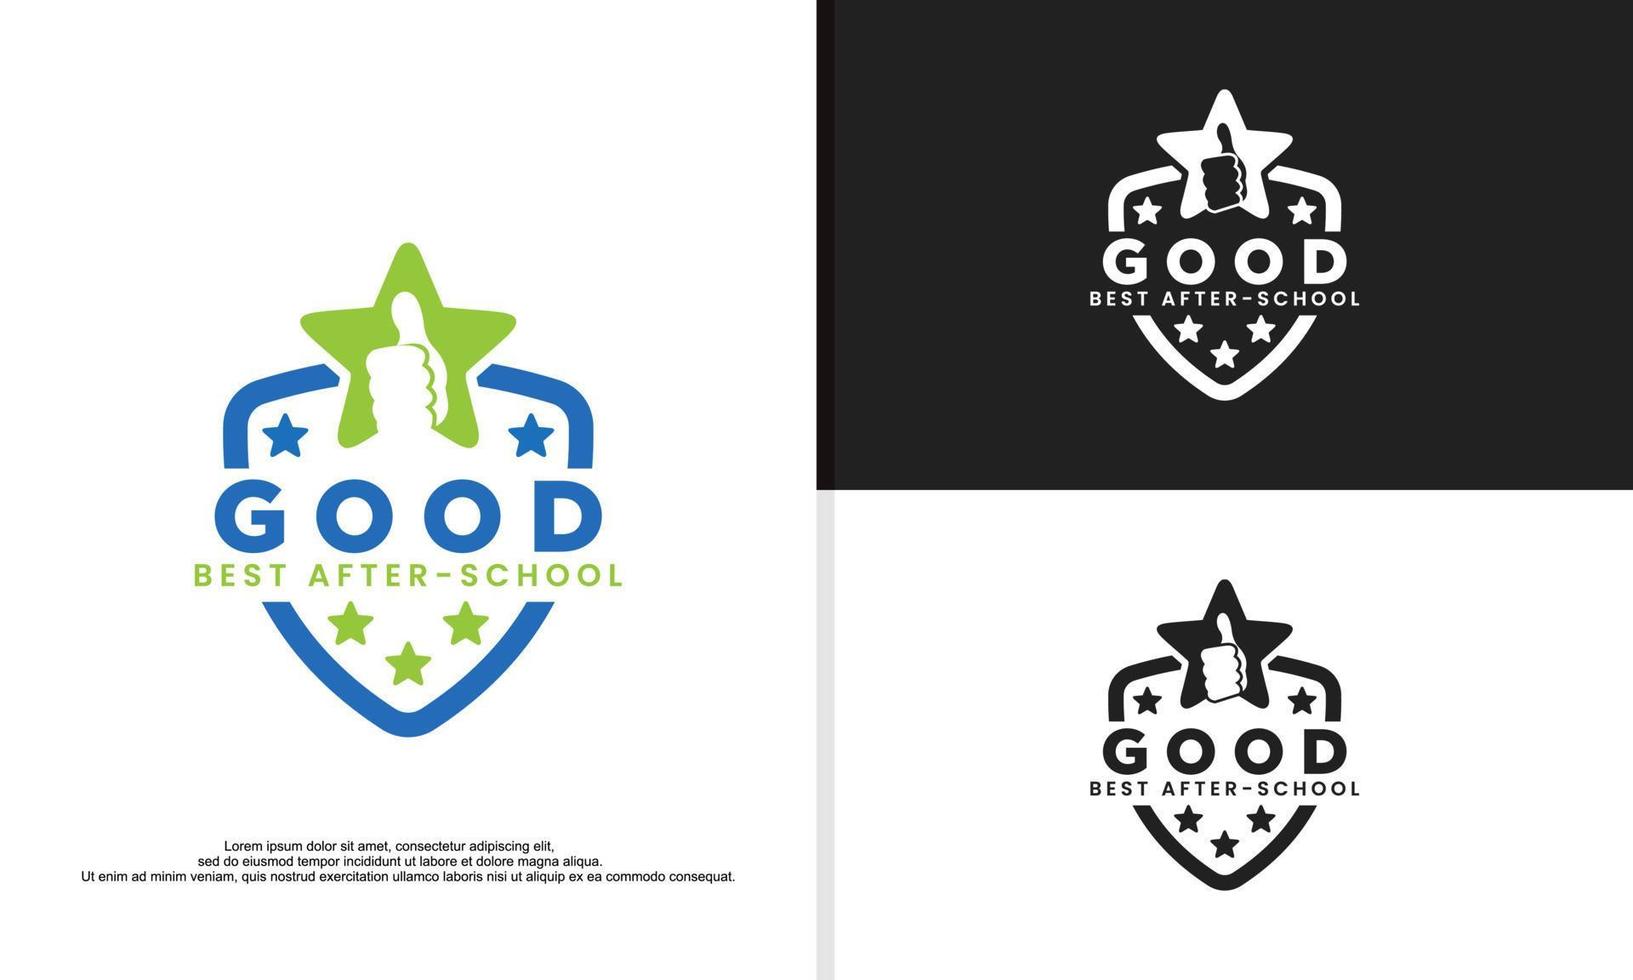 logo illustration vector graphic of after school activities, badge style and youthful.